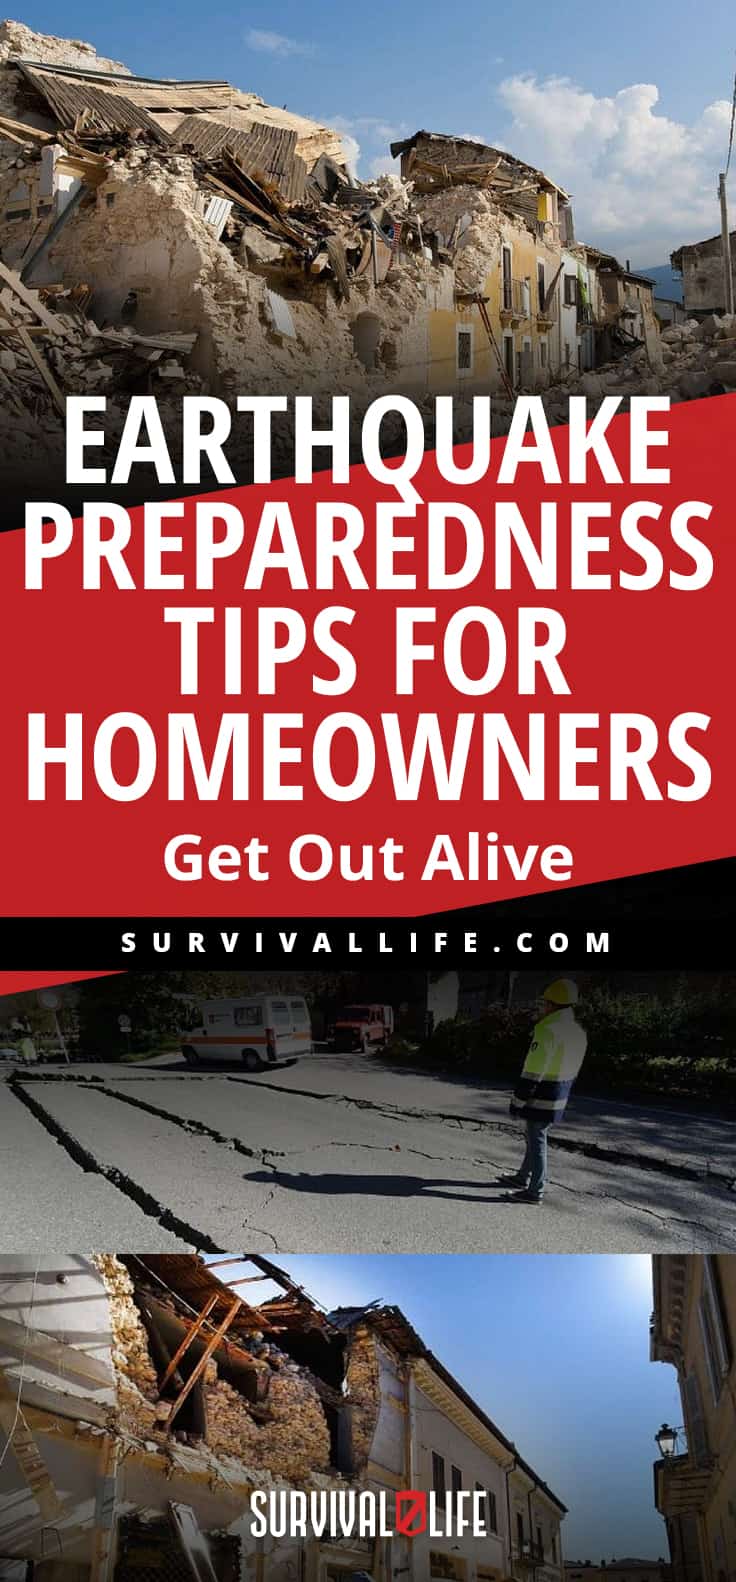 Earthquake Preparedness Tips For Homeowners | Get Out Alive